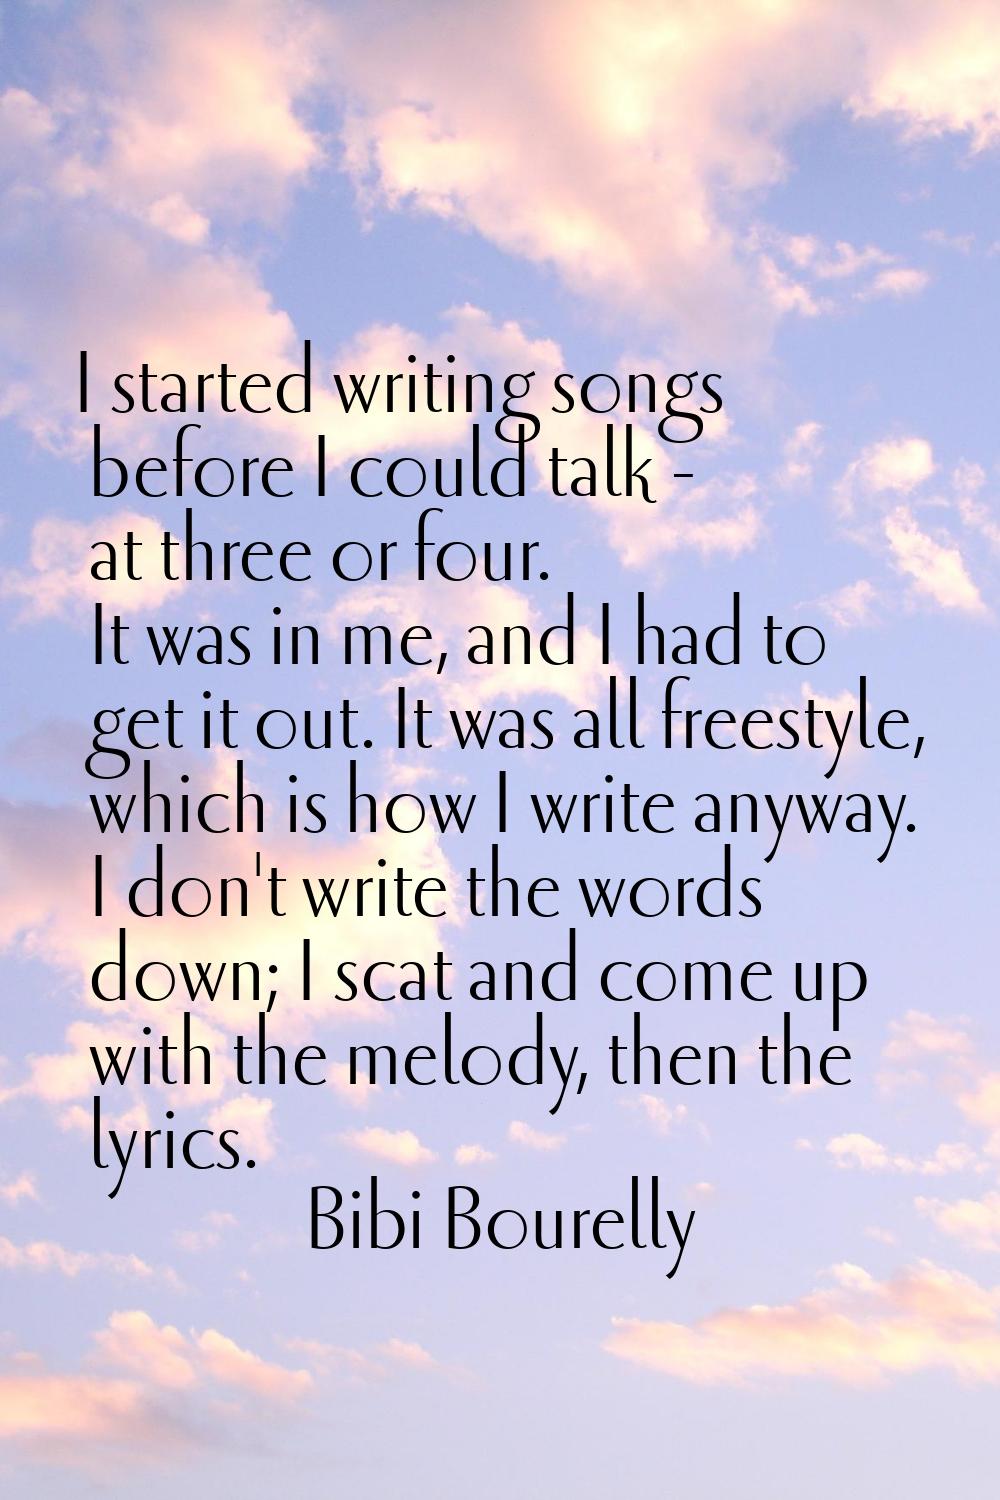 I started writing songs before I could talk - at three or four. It was in me, and I had to get it o